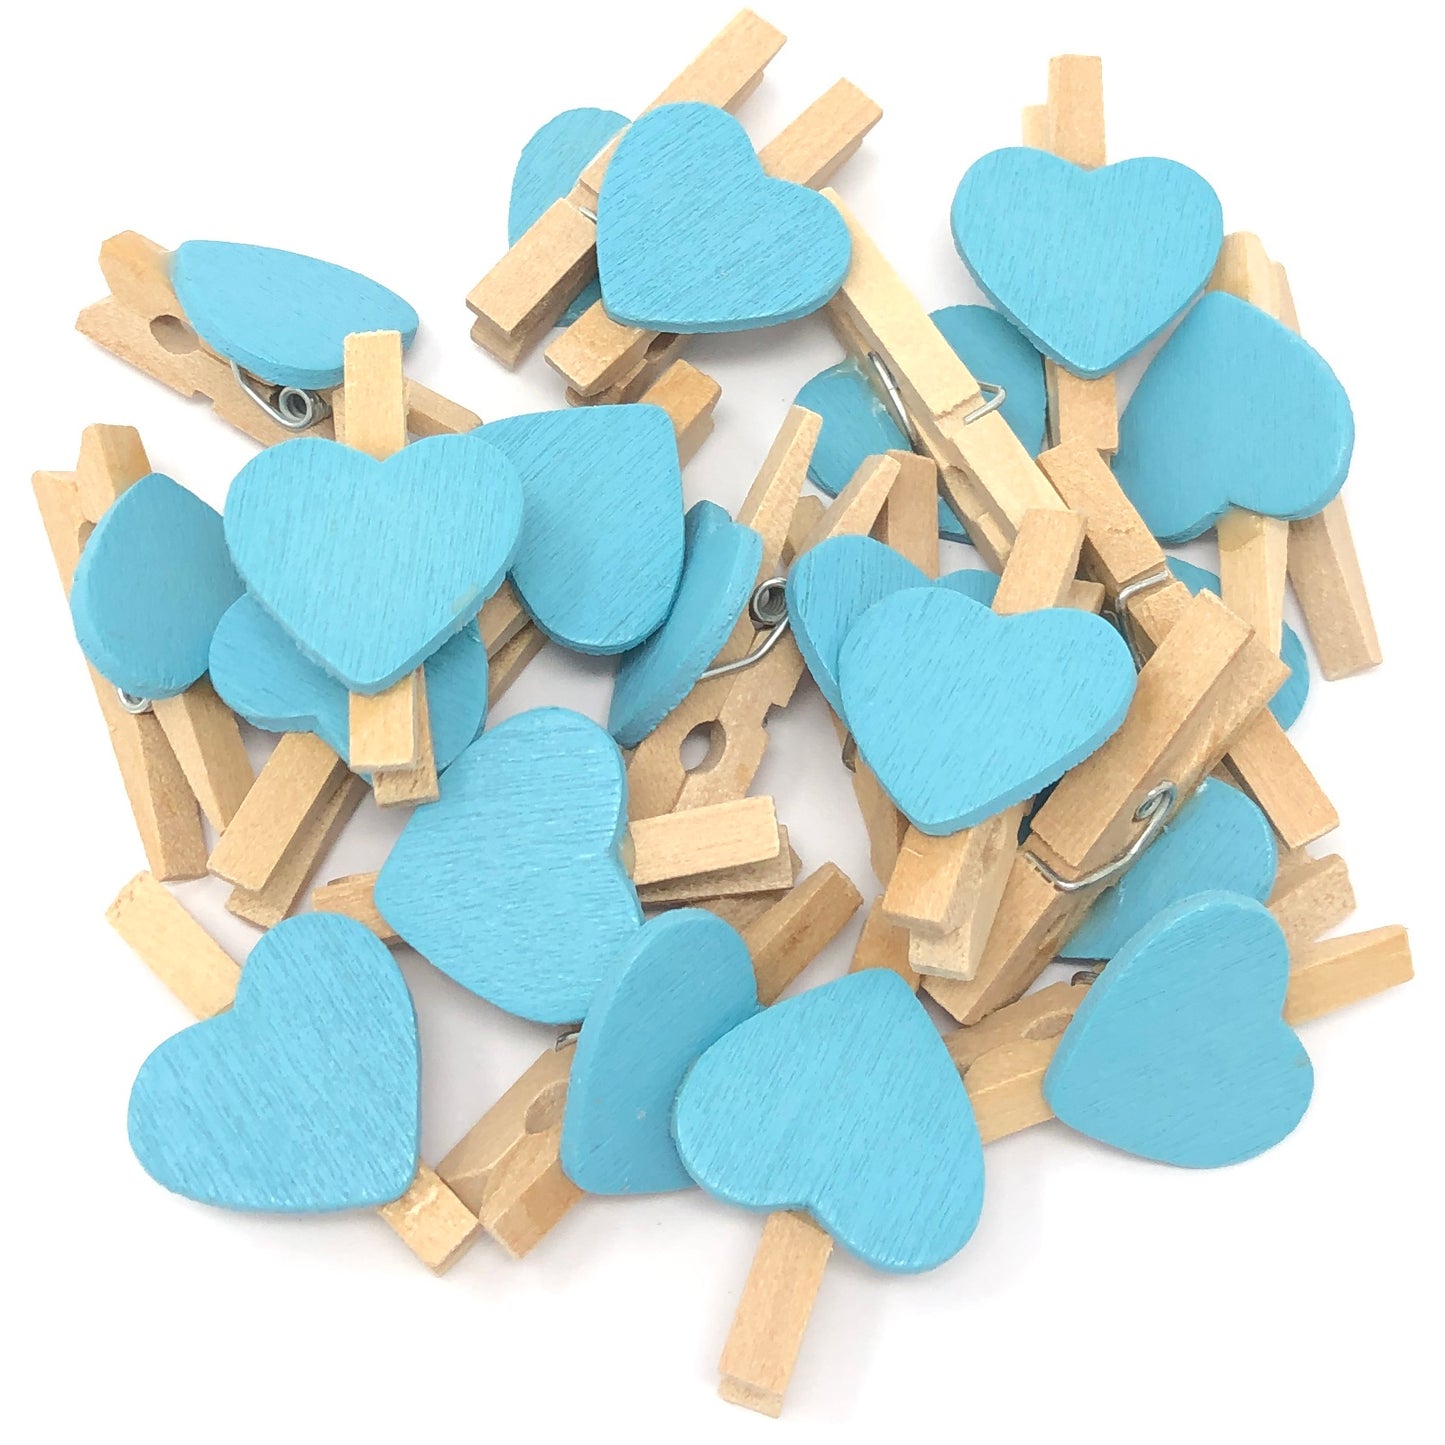 Light Blue 30mm Natural Pegs with 18mm Coloured Hearts